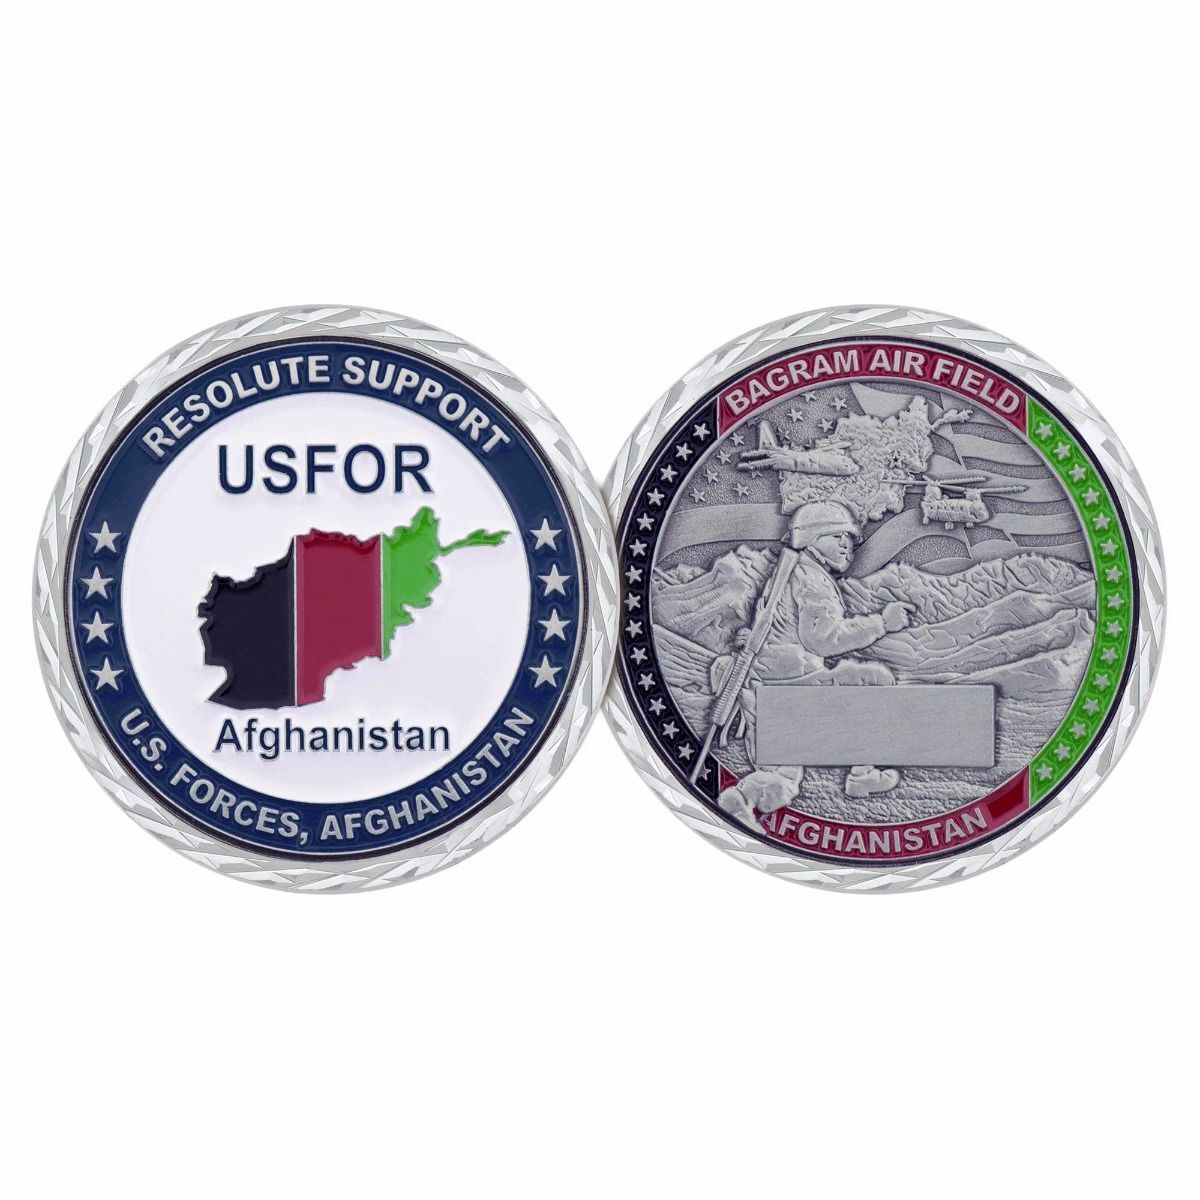 RESOLUTE SUPPORT USFOR BAGRAM AIR FIELD AFGHANISTAN 1.75\